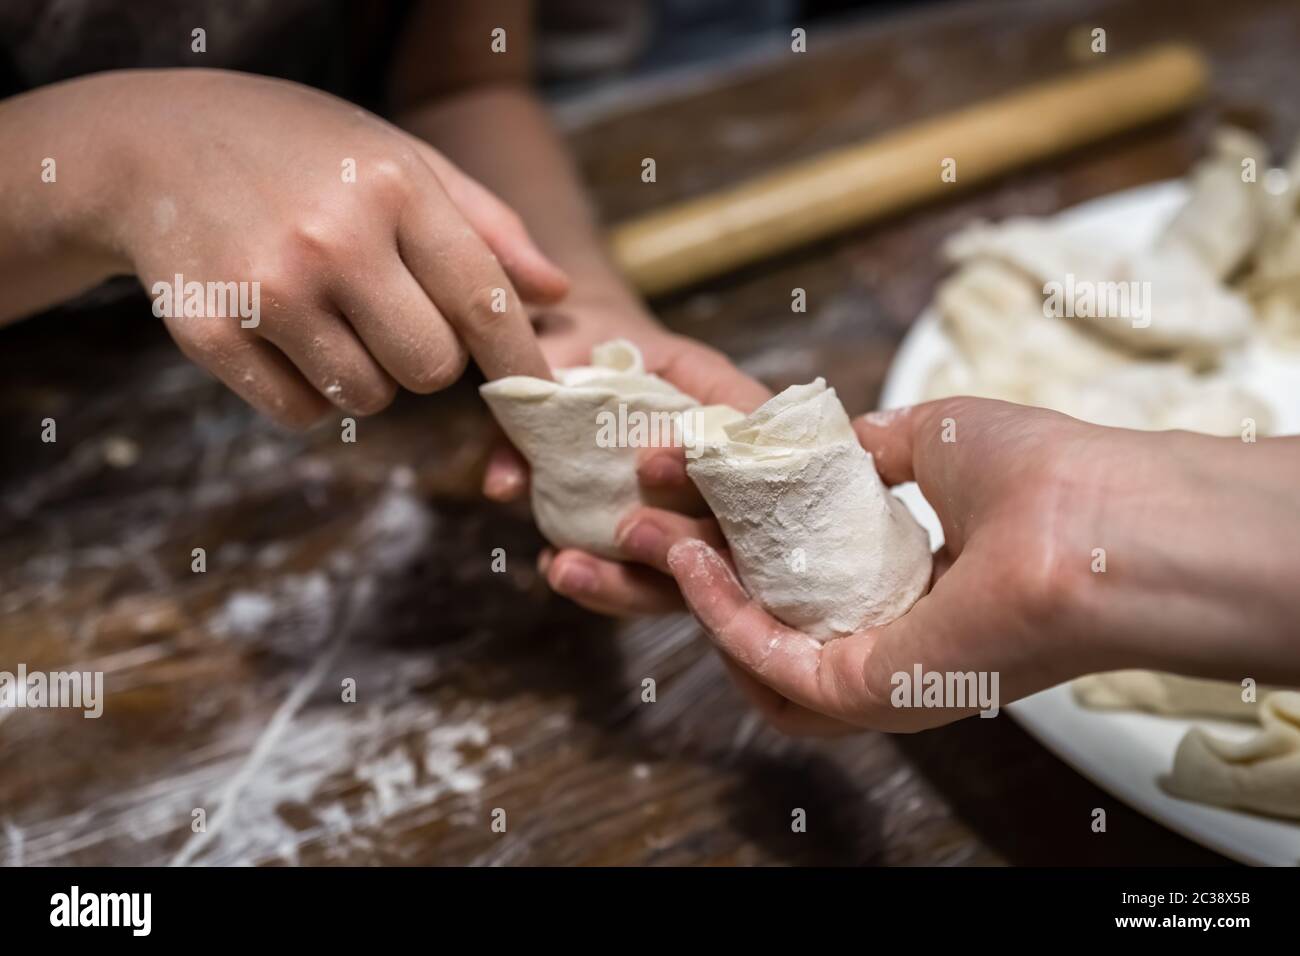 Students learning how to shape chinese dumplings Stock Photo